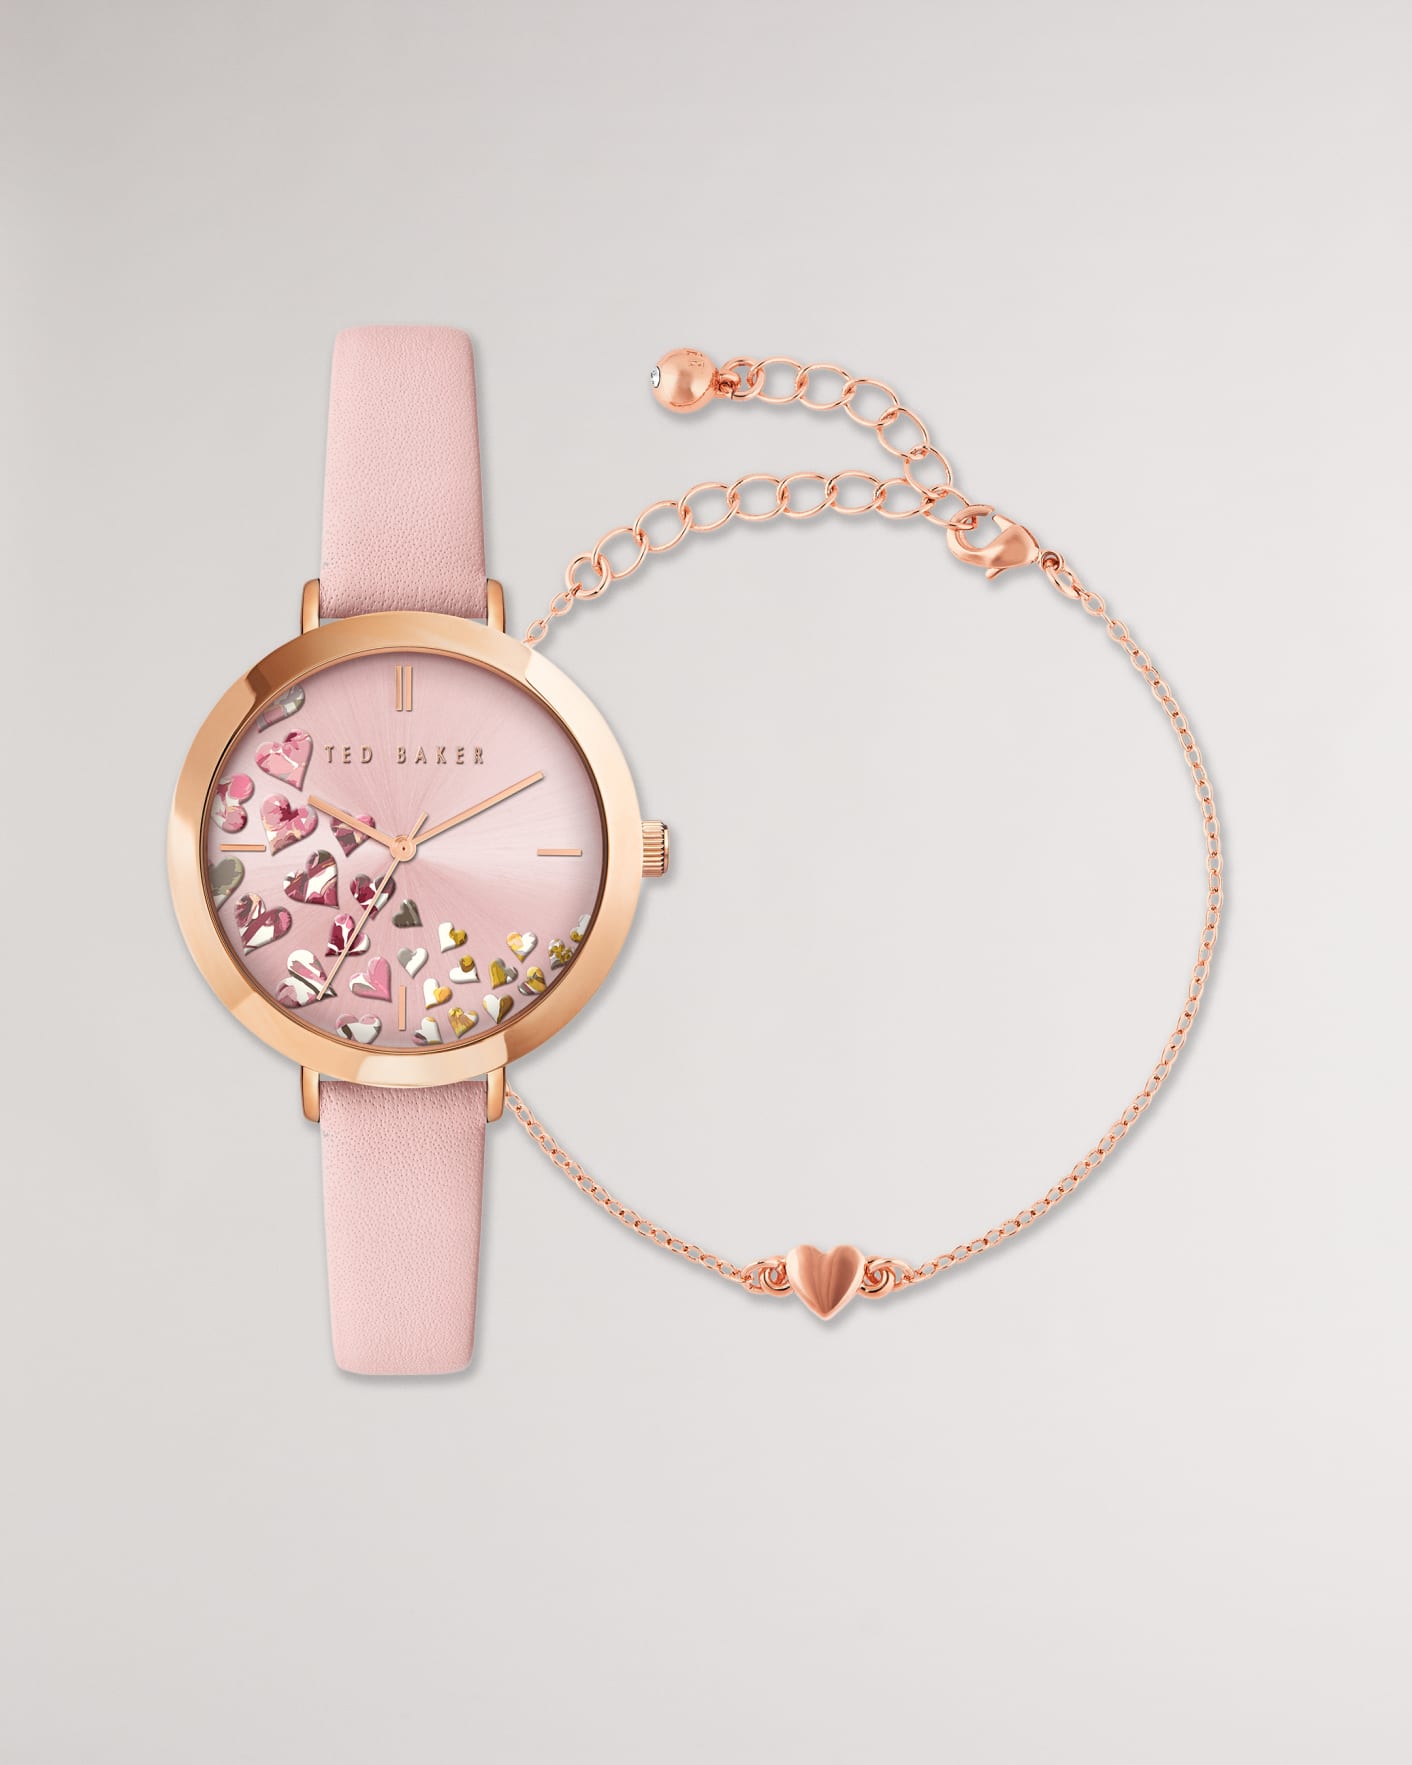 Pink Heart bracelet and watch gift set Ted Baker